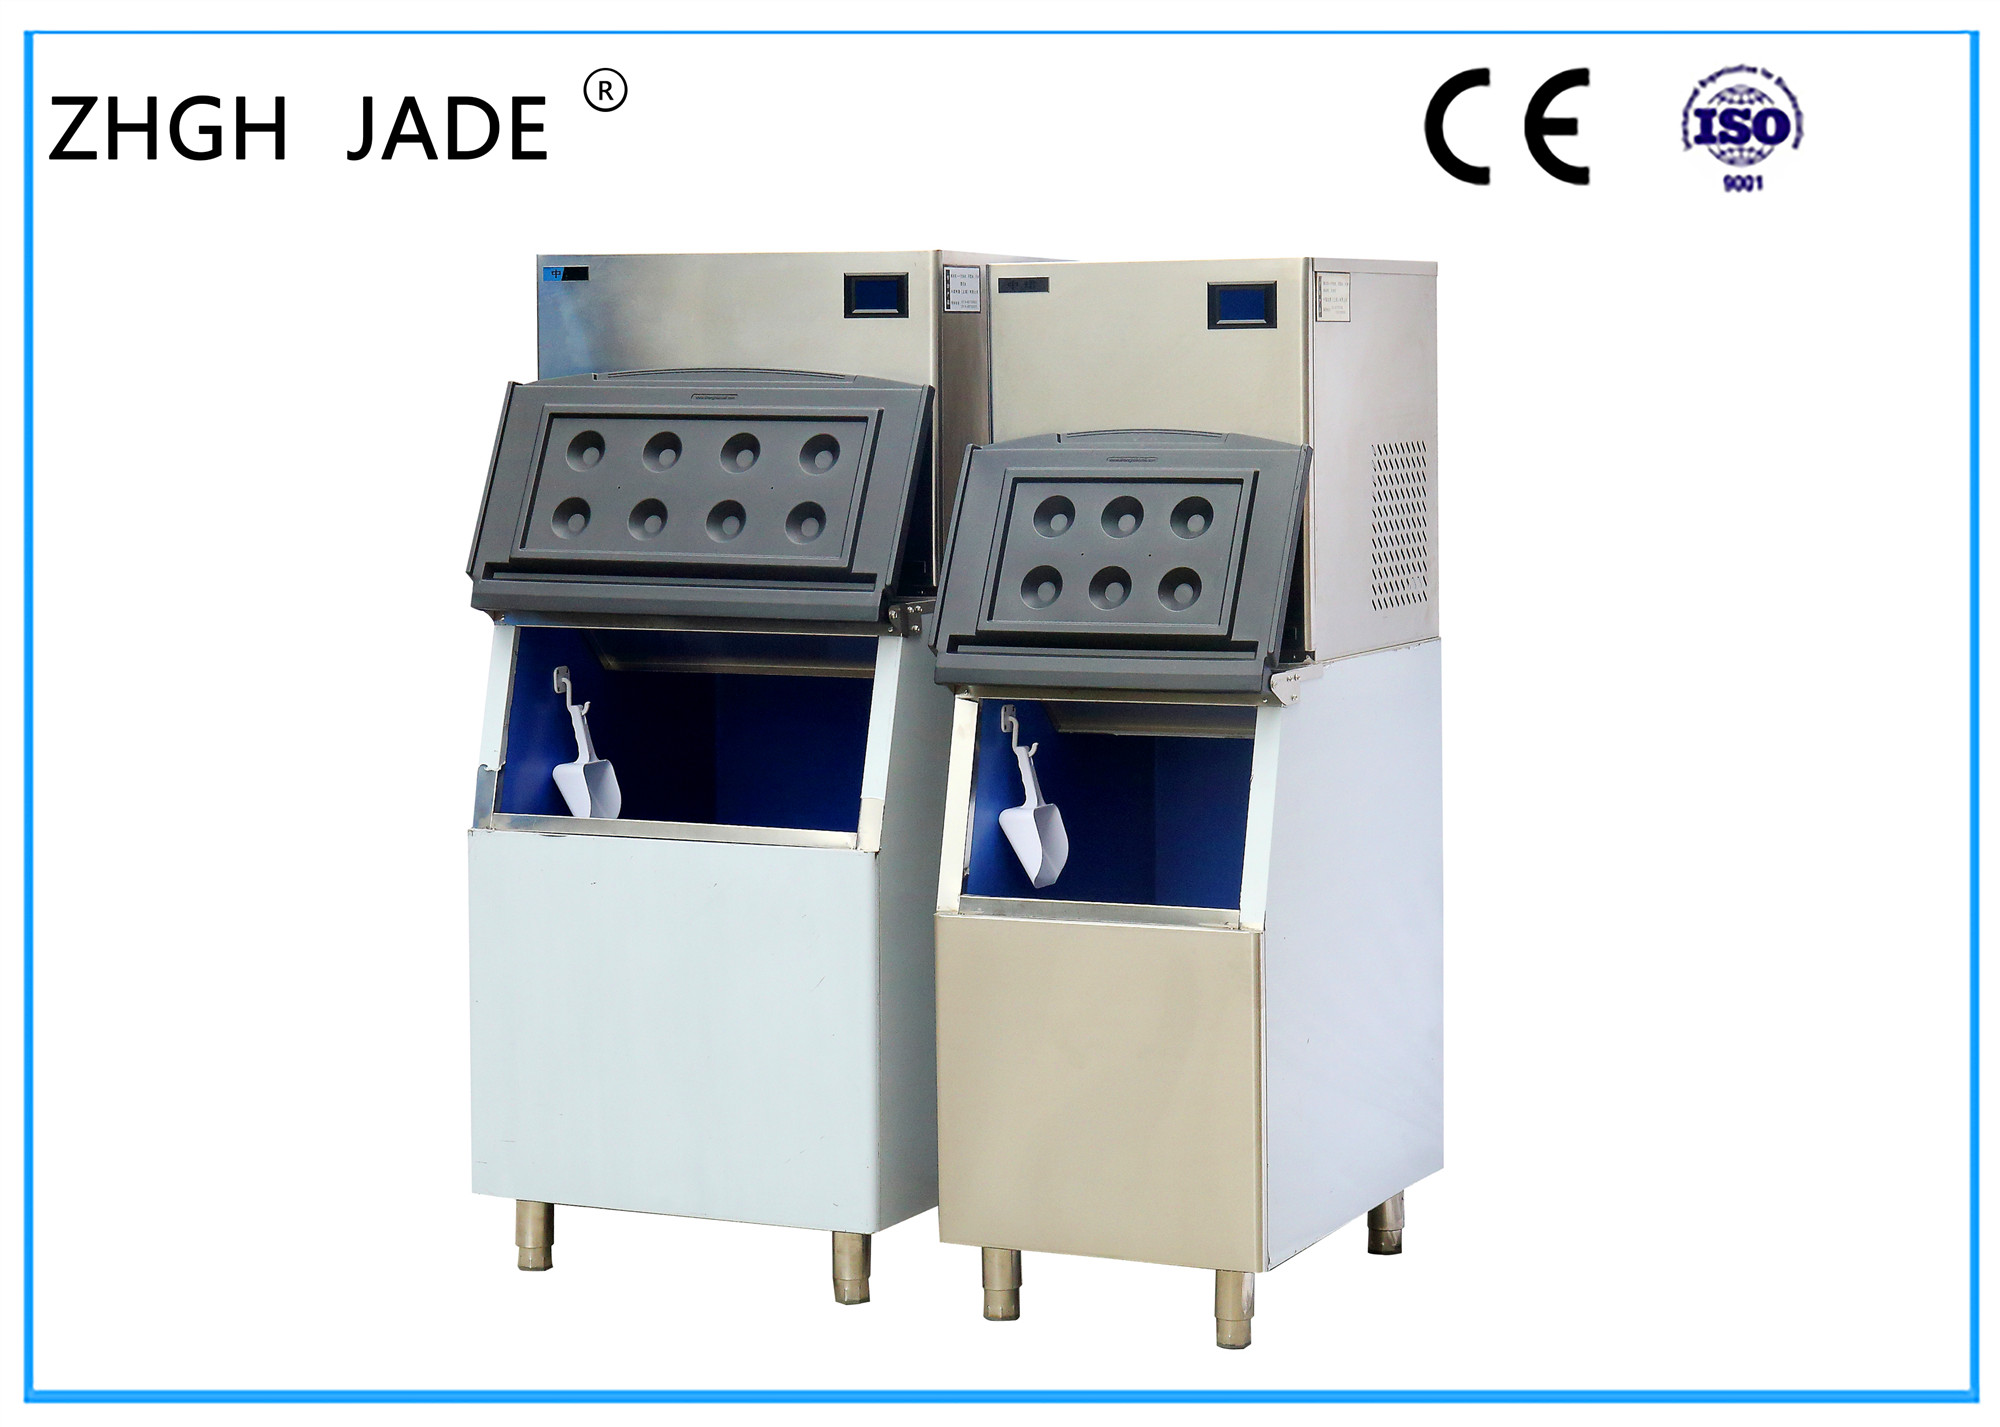 Automatic Air Cooled Ice Machine Energy Efficient 760 * 820 * 1730MM